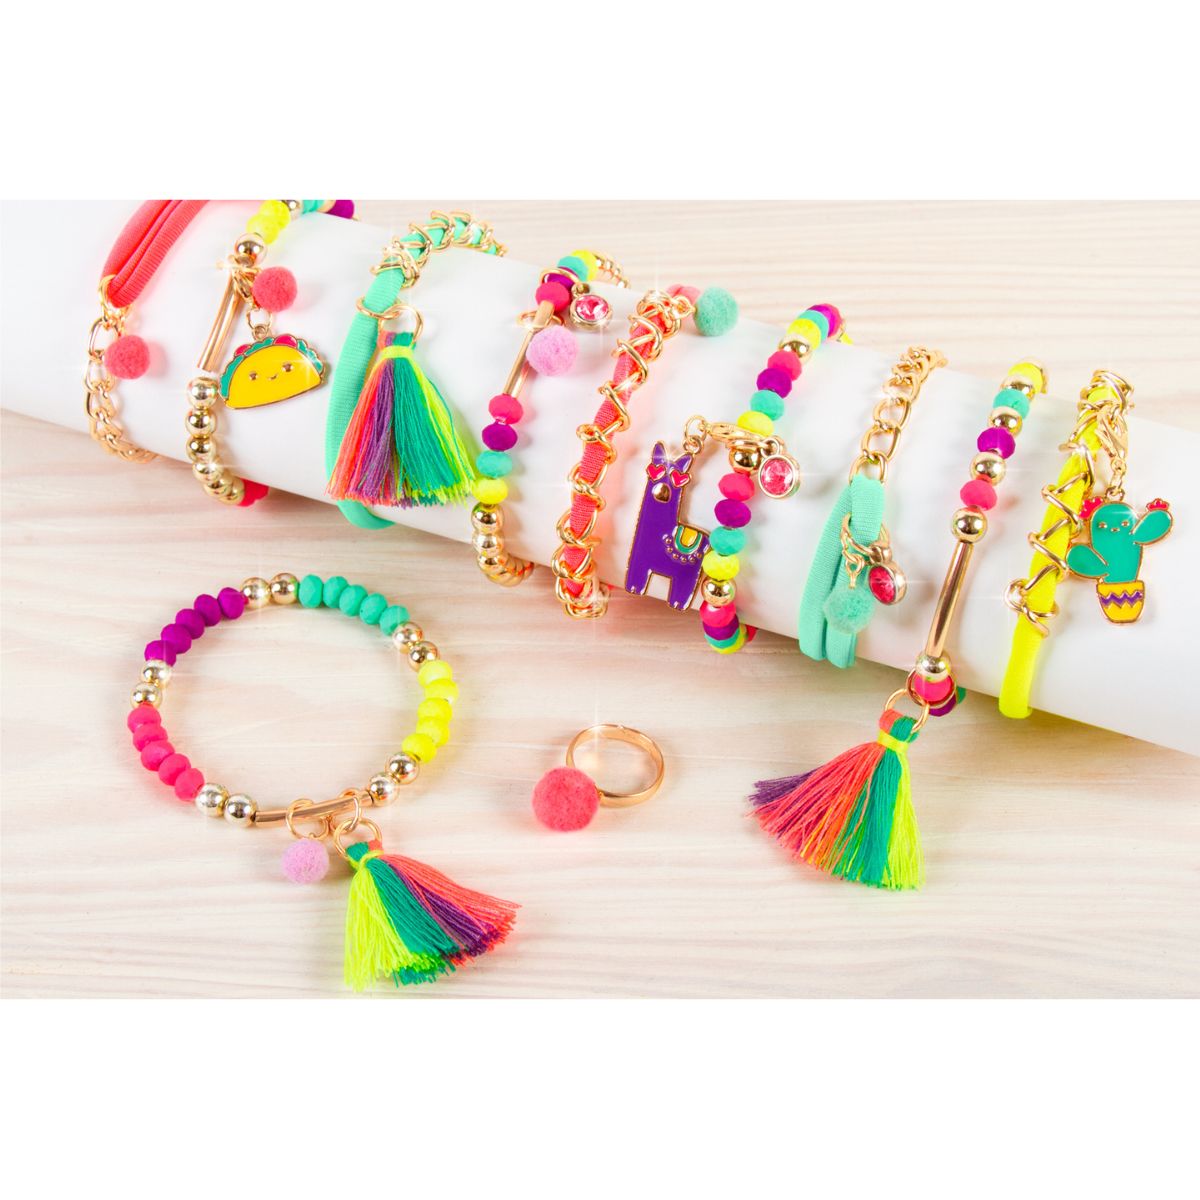 Neo Brite Chains &amp; Charms